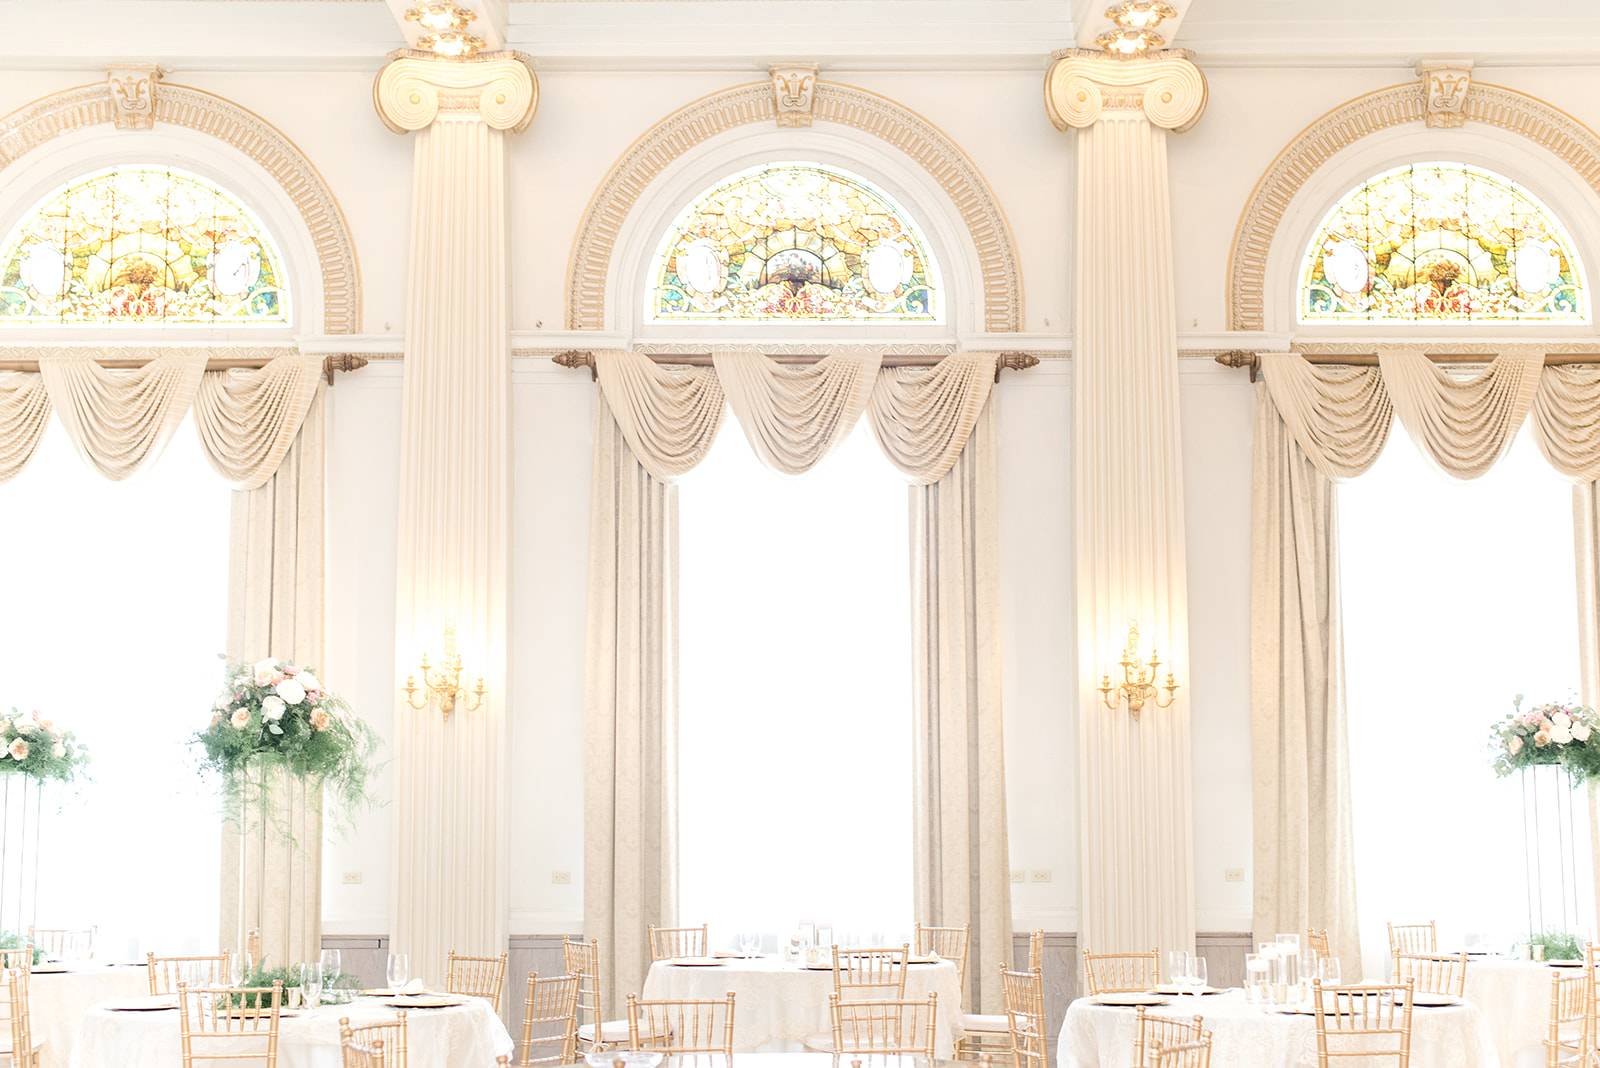 The Westin Wedding Venue Columbus Ohio Grand Ballroom with Stained glass windows and french renaissance architecture